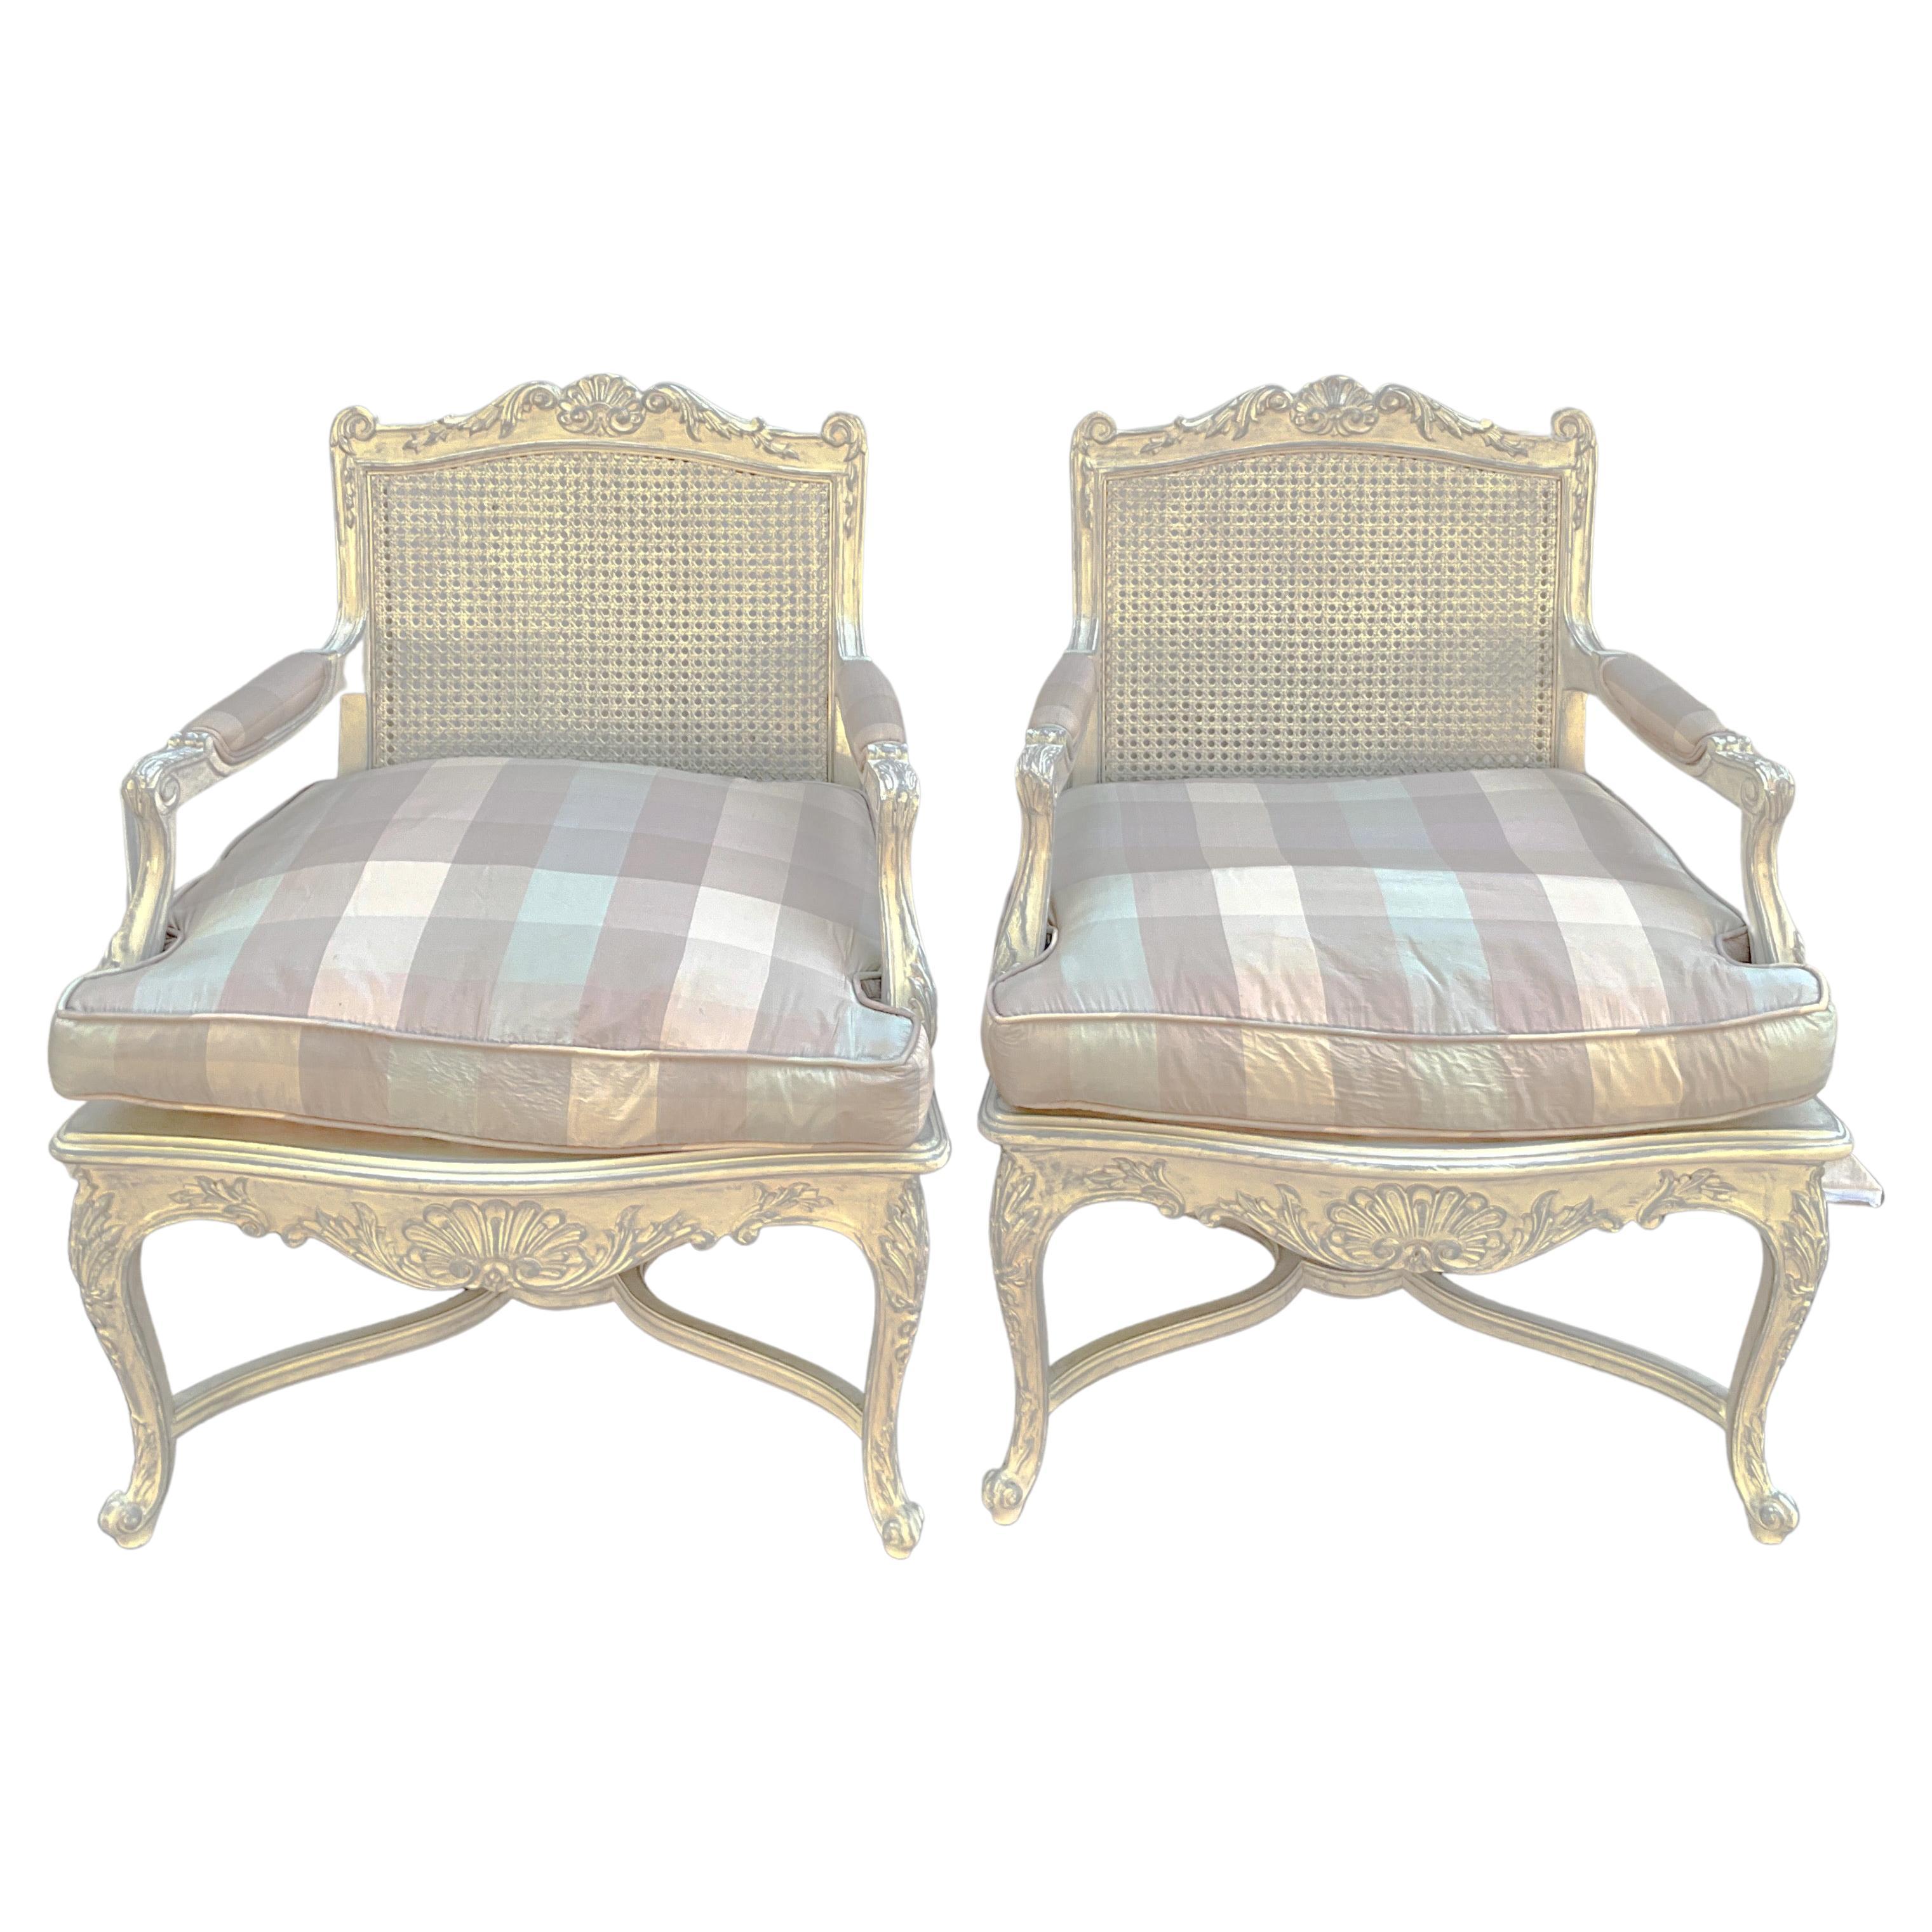 French Louis XV Style Carved Shell & Painted Caned Bergere Chairs -Pair For Sale